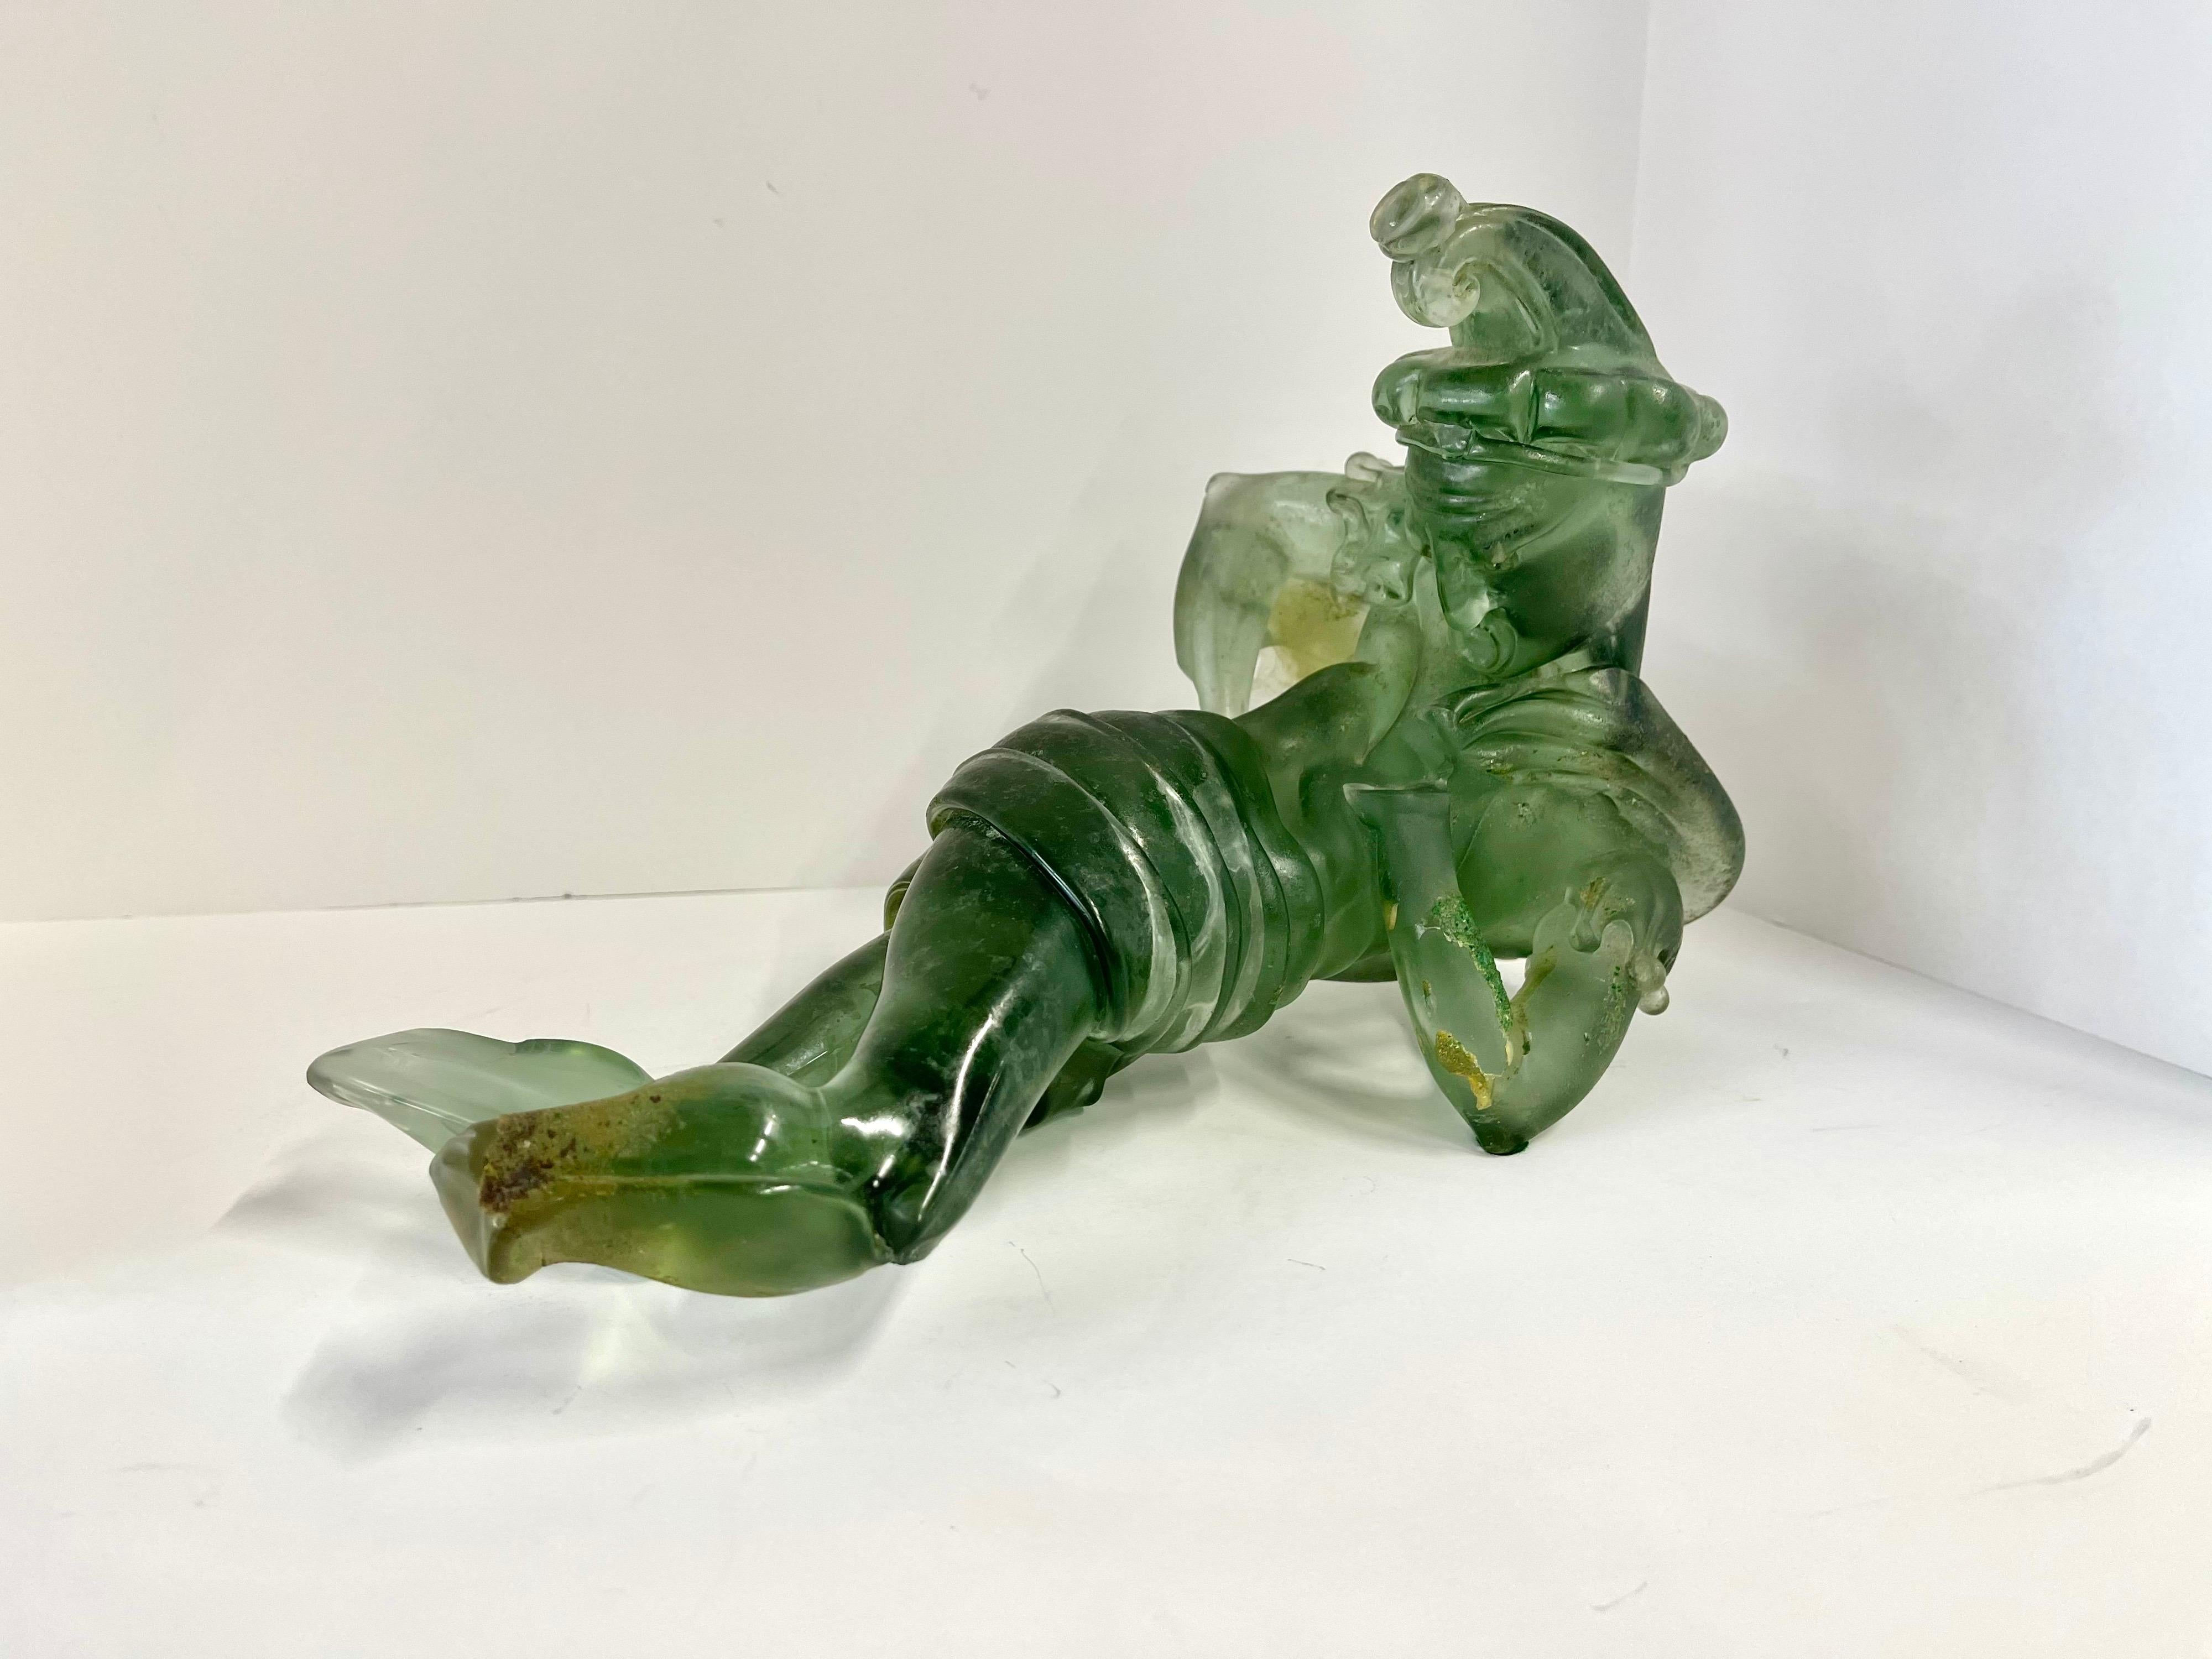 An Italian Murano glass figure of a jester in a Scavo finish attributed to Ermanno Nason for Cenedese. Typical of his figural forms there are no hands or feet. The inclusions in the glass and surface imperfections are also in the style of his scavo